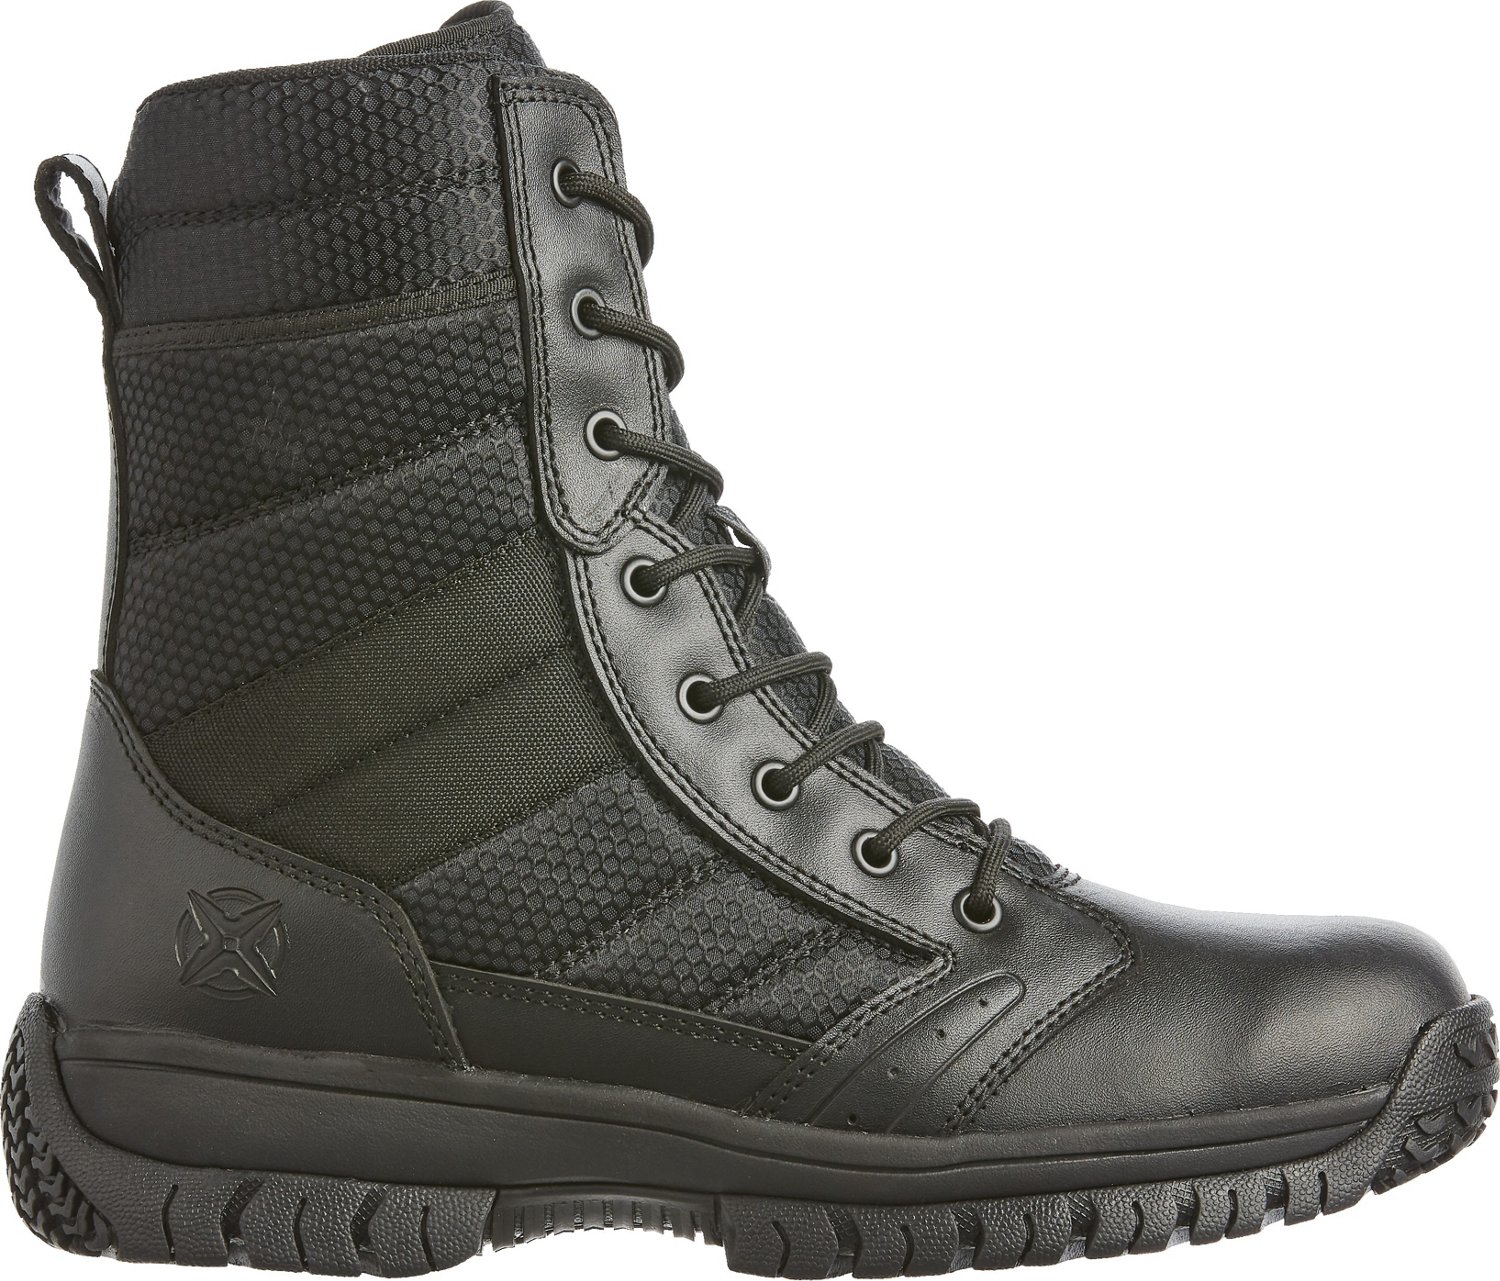 Men's Military Tactical Boots | Price Match Guaranteed